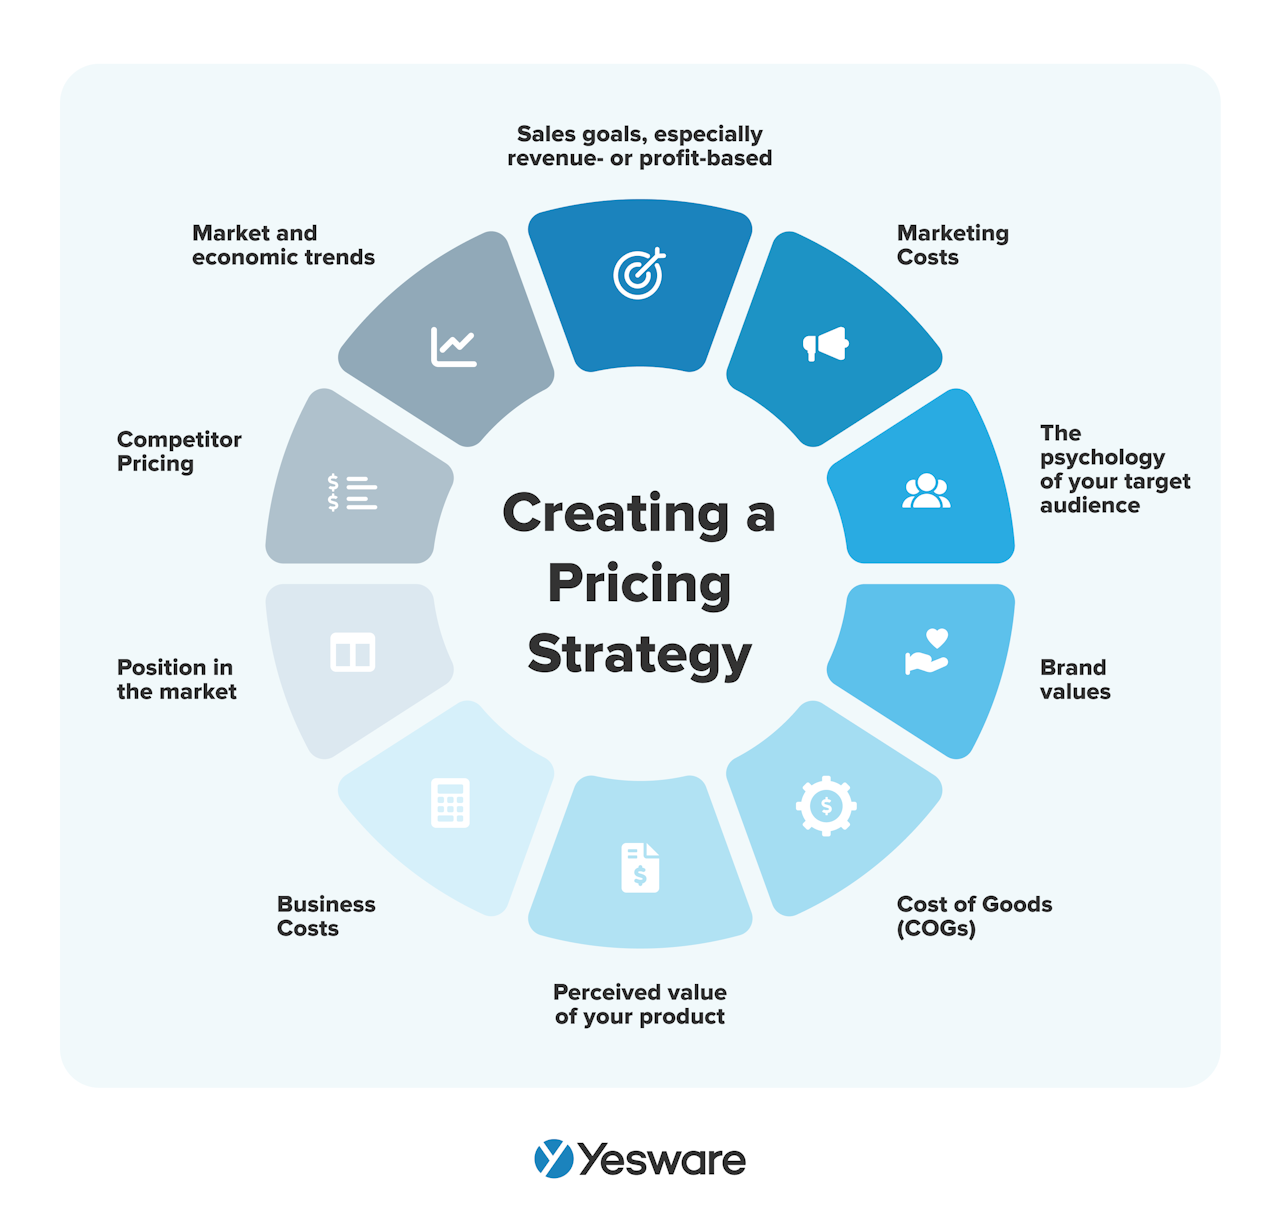 sales planning: adapt to market changes with pricing strategies